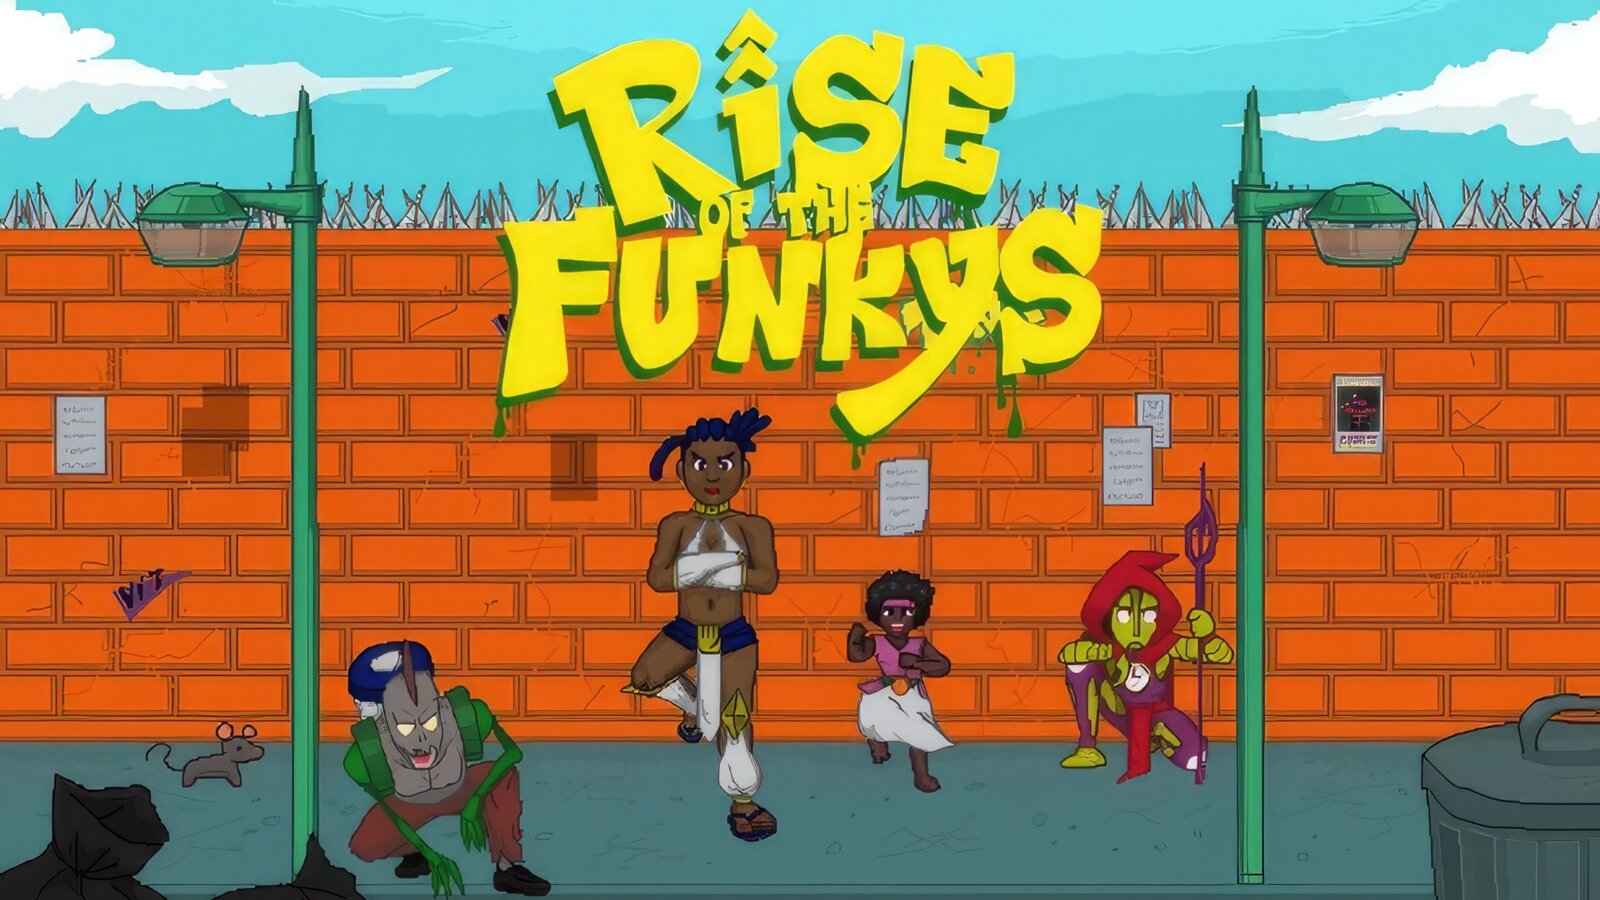 Rise of the Funkys